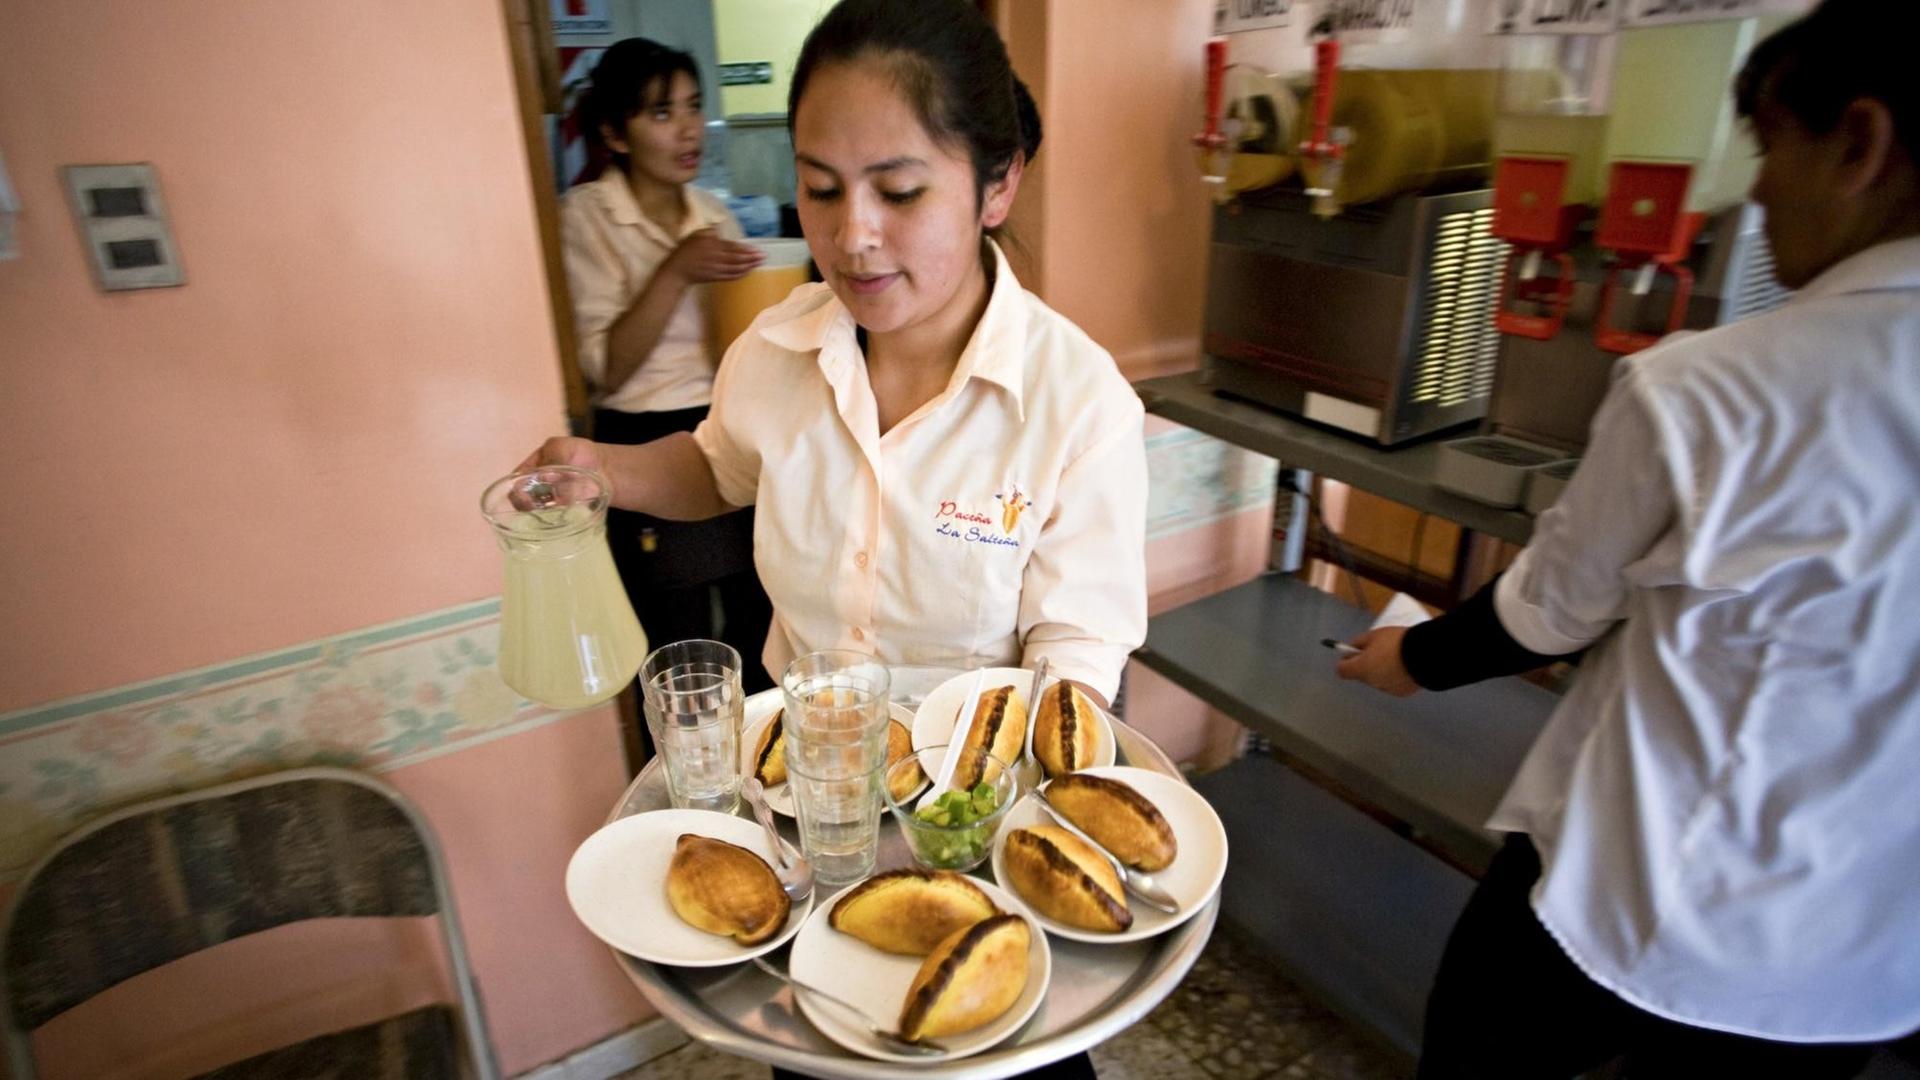 A picture dated 28 August 2008 shows a young woman working in a restaurant in La Paz, Bolivia. More than one third of Latin American women do not have income of their own according to a report of the Economic Commission for Latin America (ECLAC). PATRICIO CROOKER/dpa | Verwendung weltweit